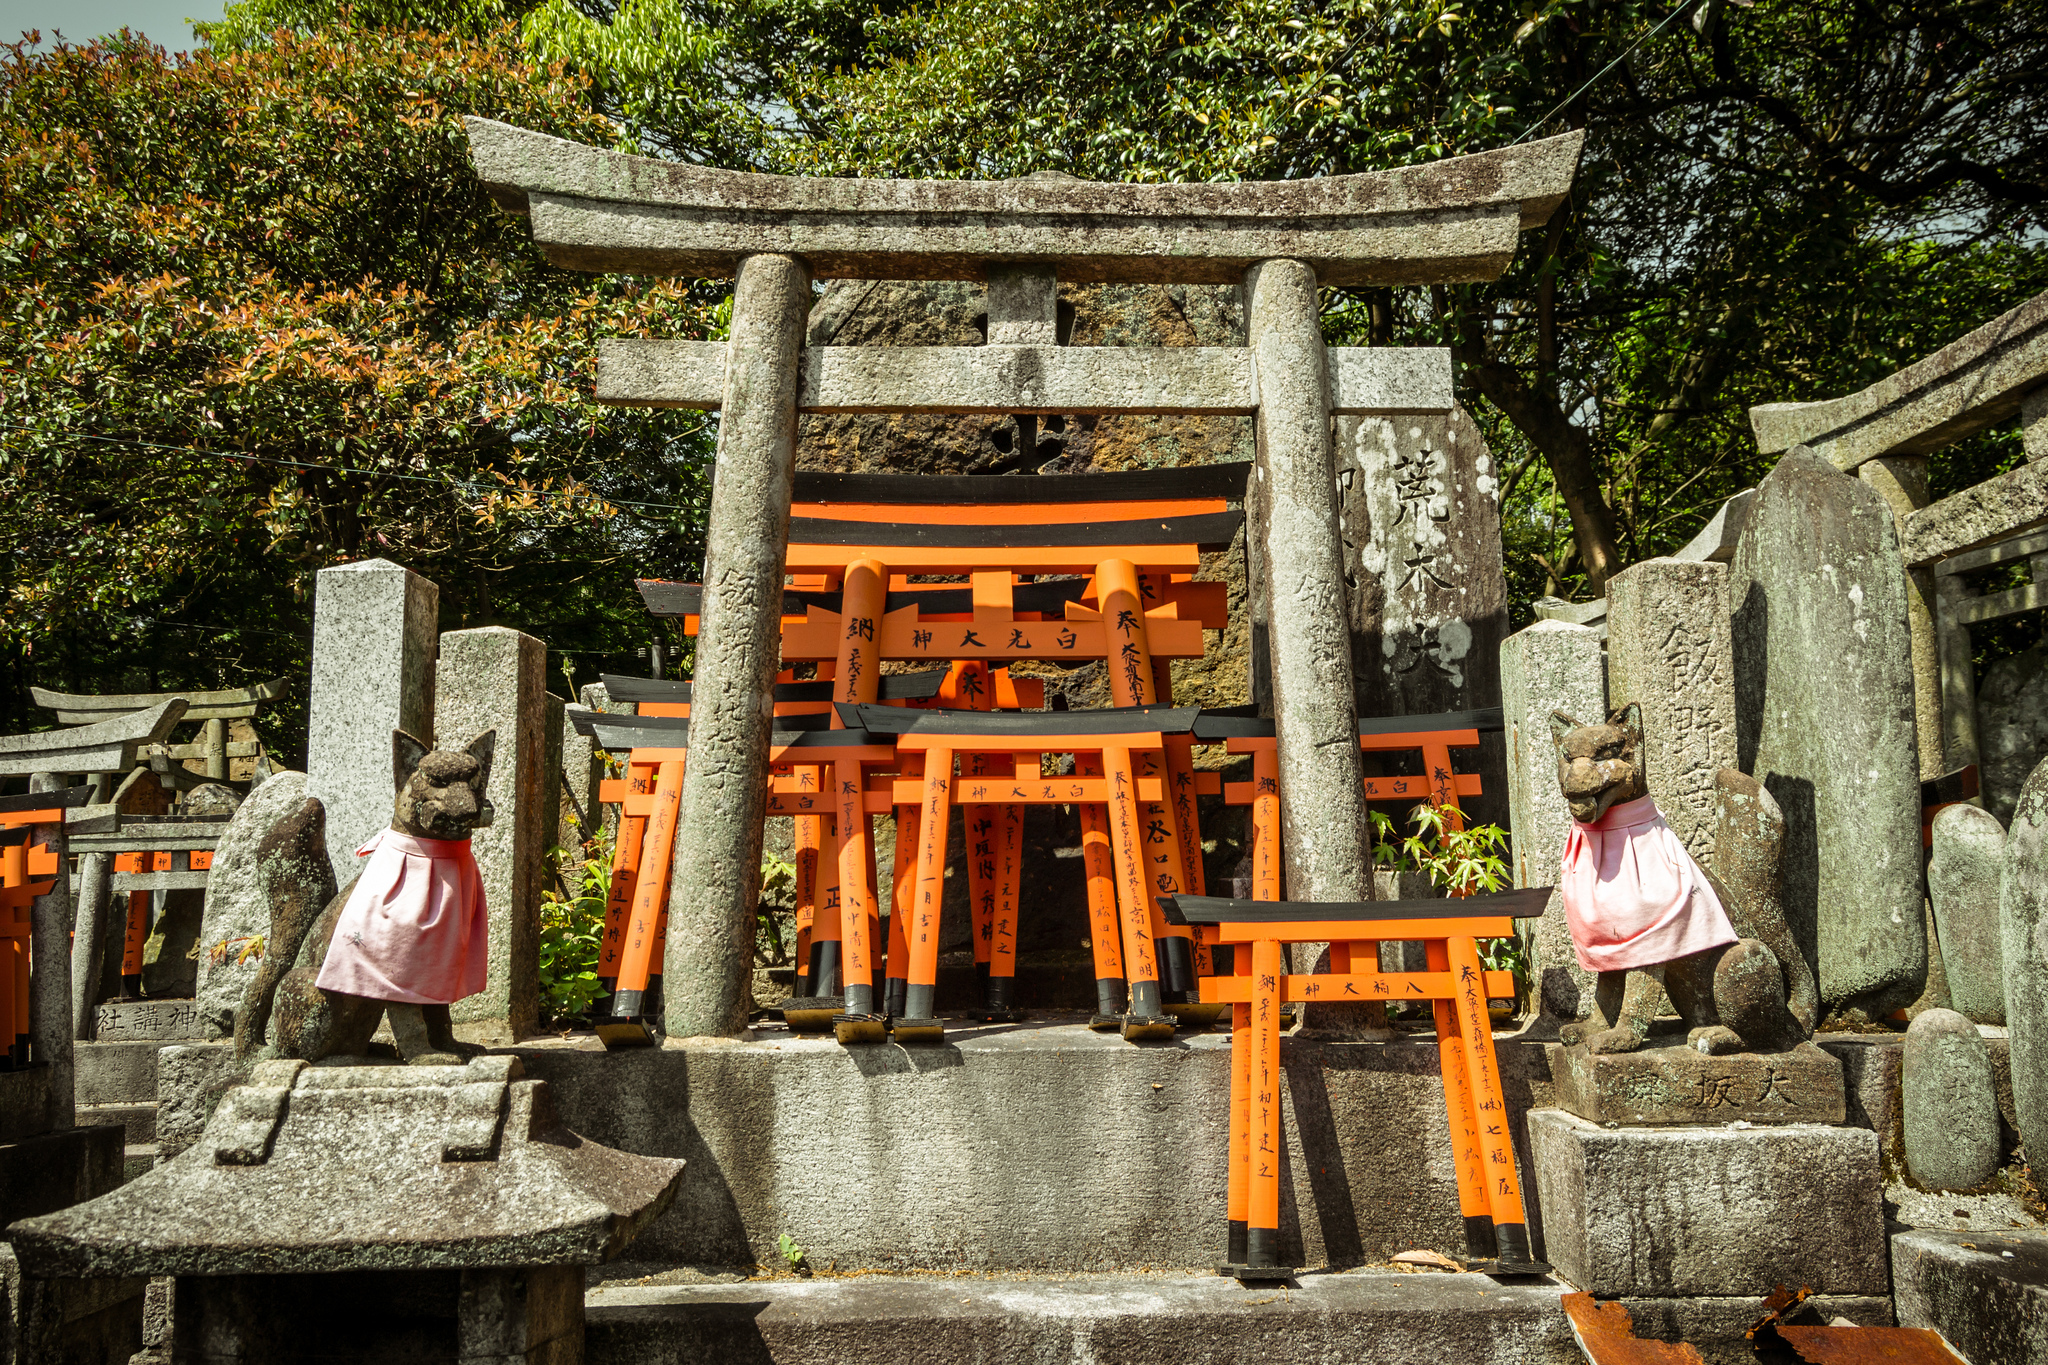 A Shinto Shrine Guide 8 Things You Will Find Inside a Shinto Shrine in Japa...